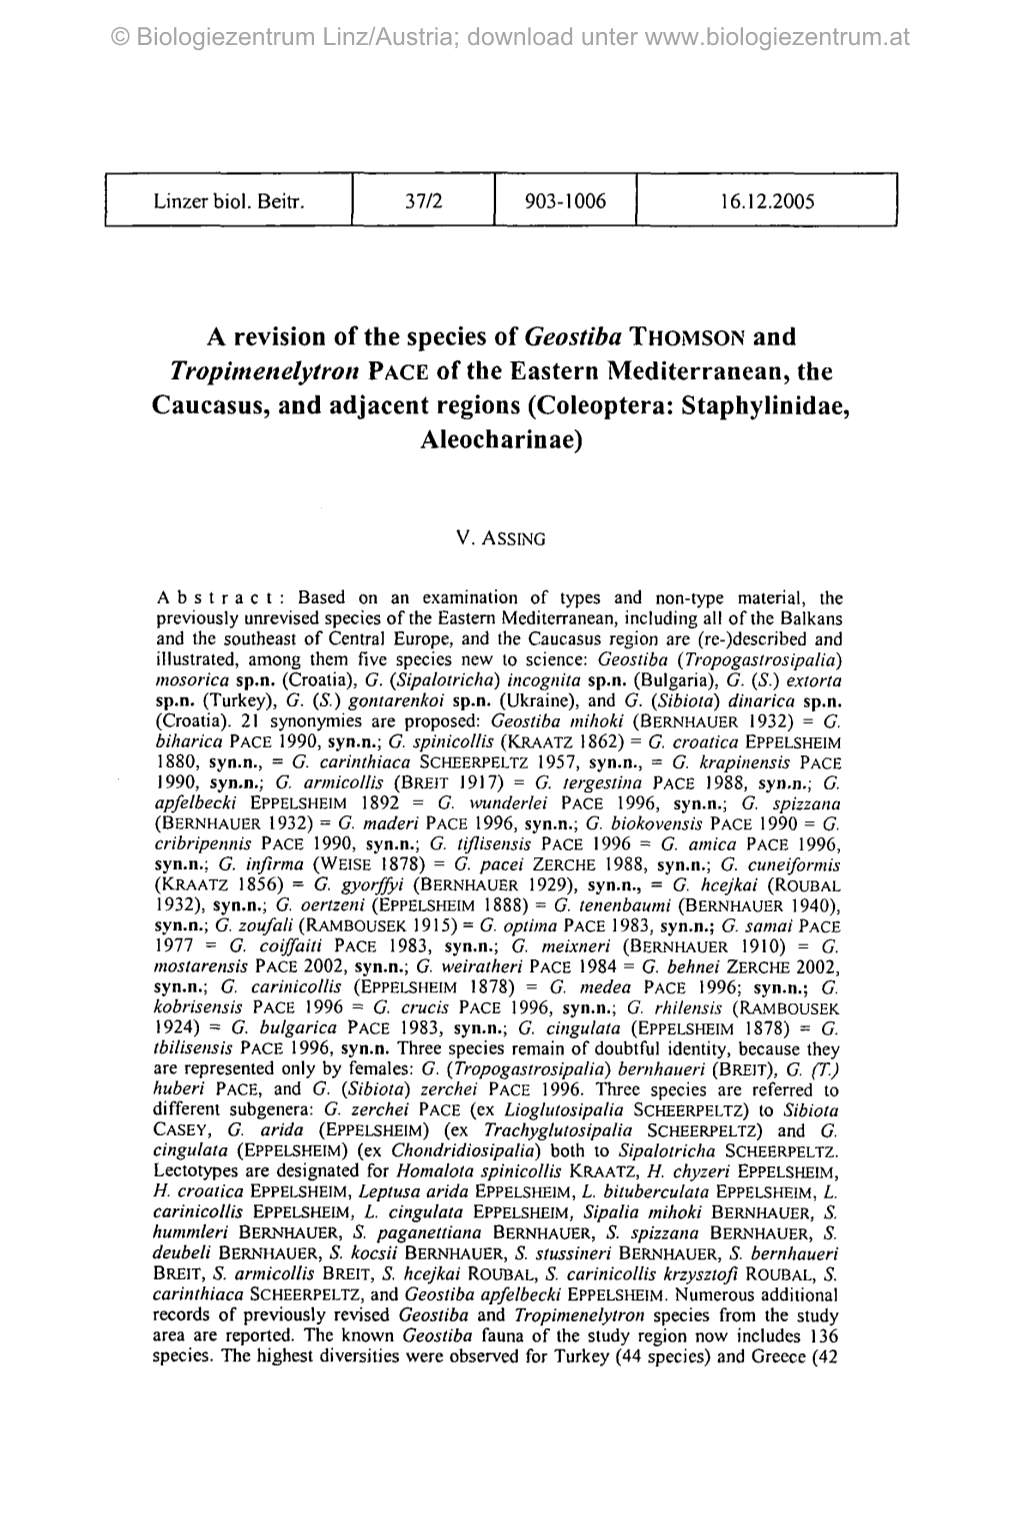 A Revision of the Species of Geostiba THOMSON and Tropimenelytron